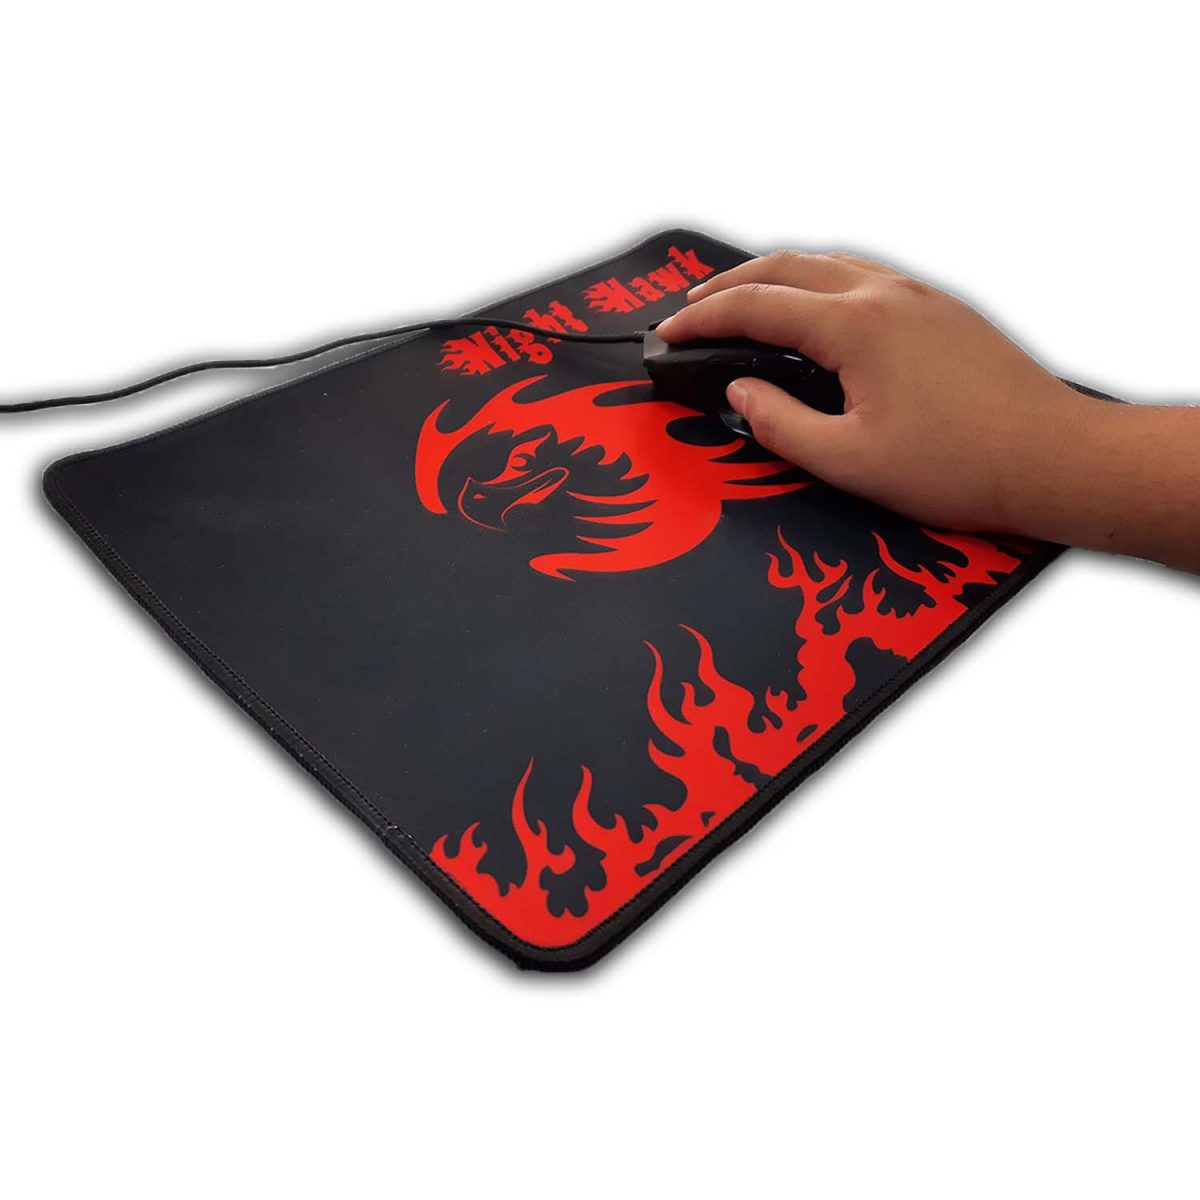 Gaming Mouse Pad (Black & Red // 36 x 26 cm)